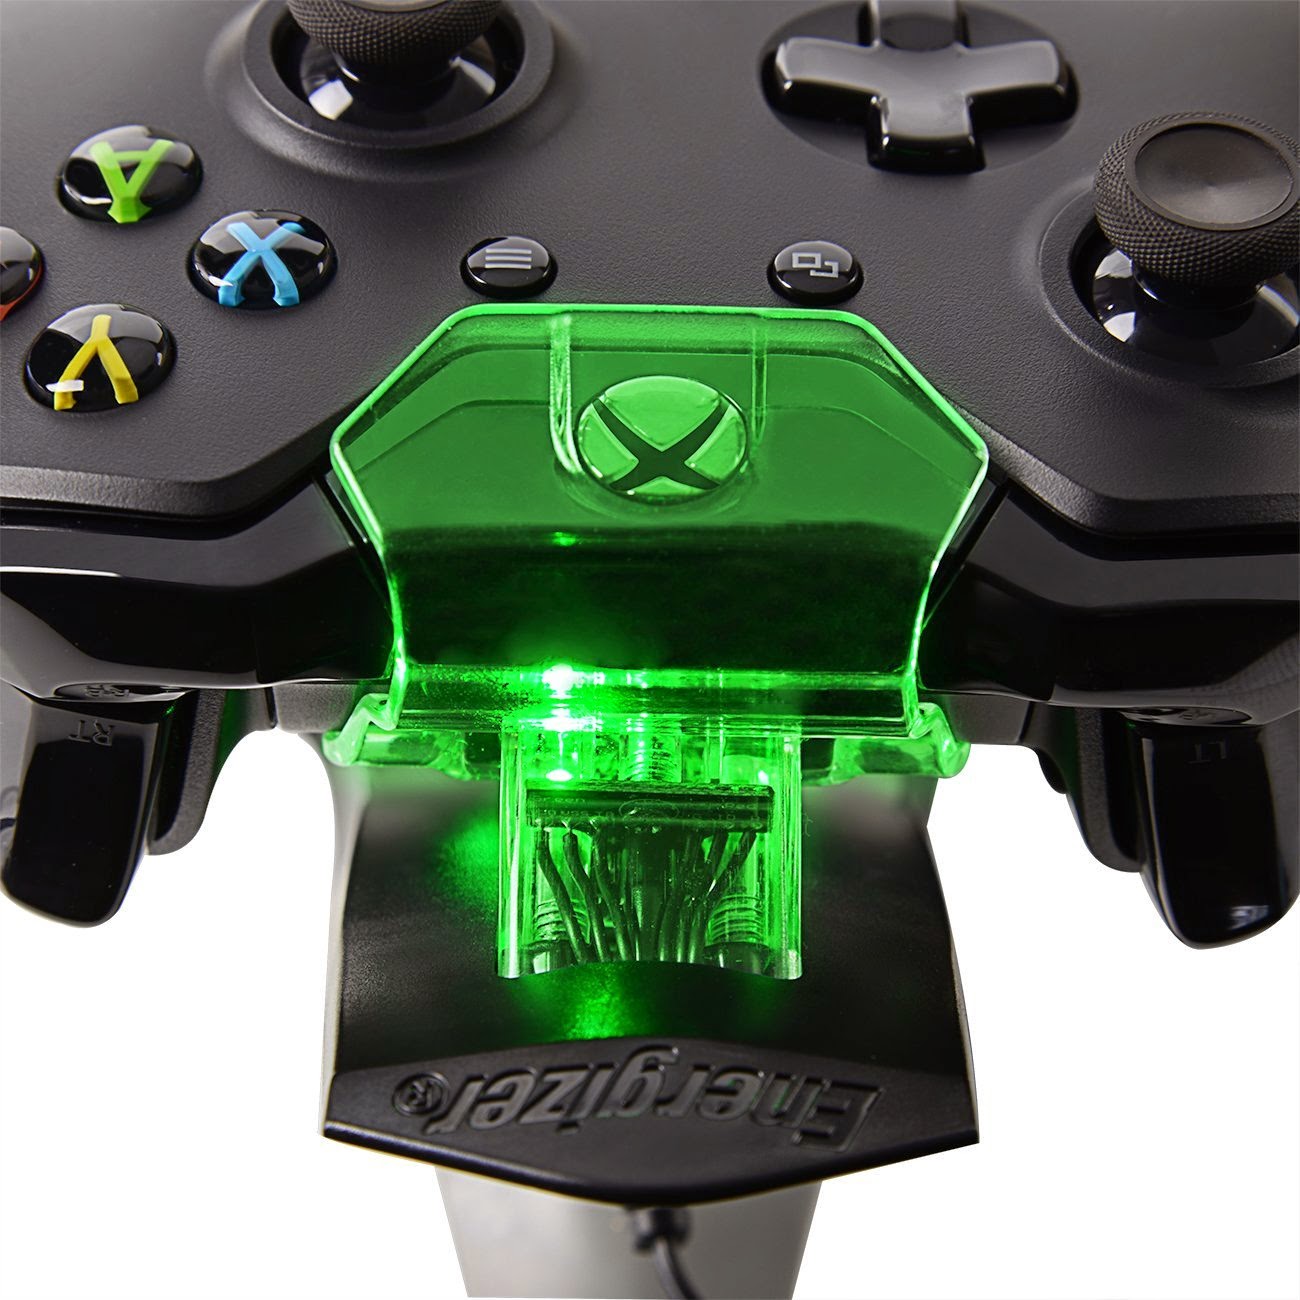 How to Recharge Xbox One Wireless Controller - Survivor Games